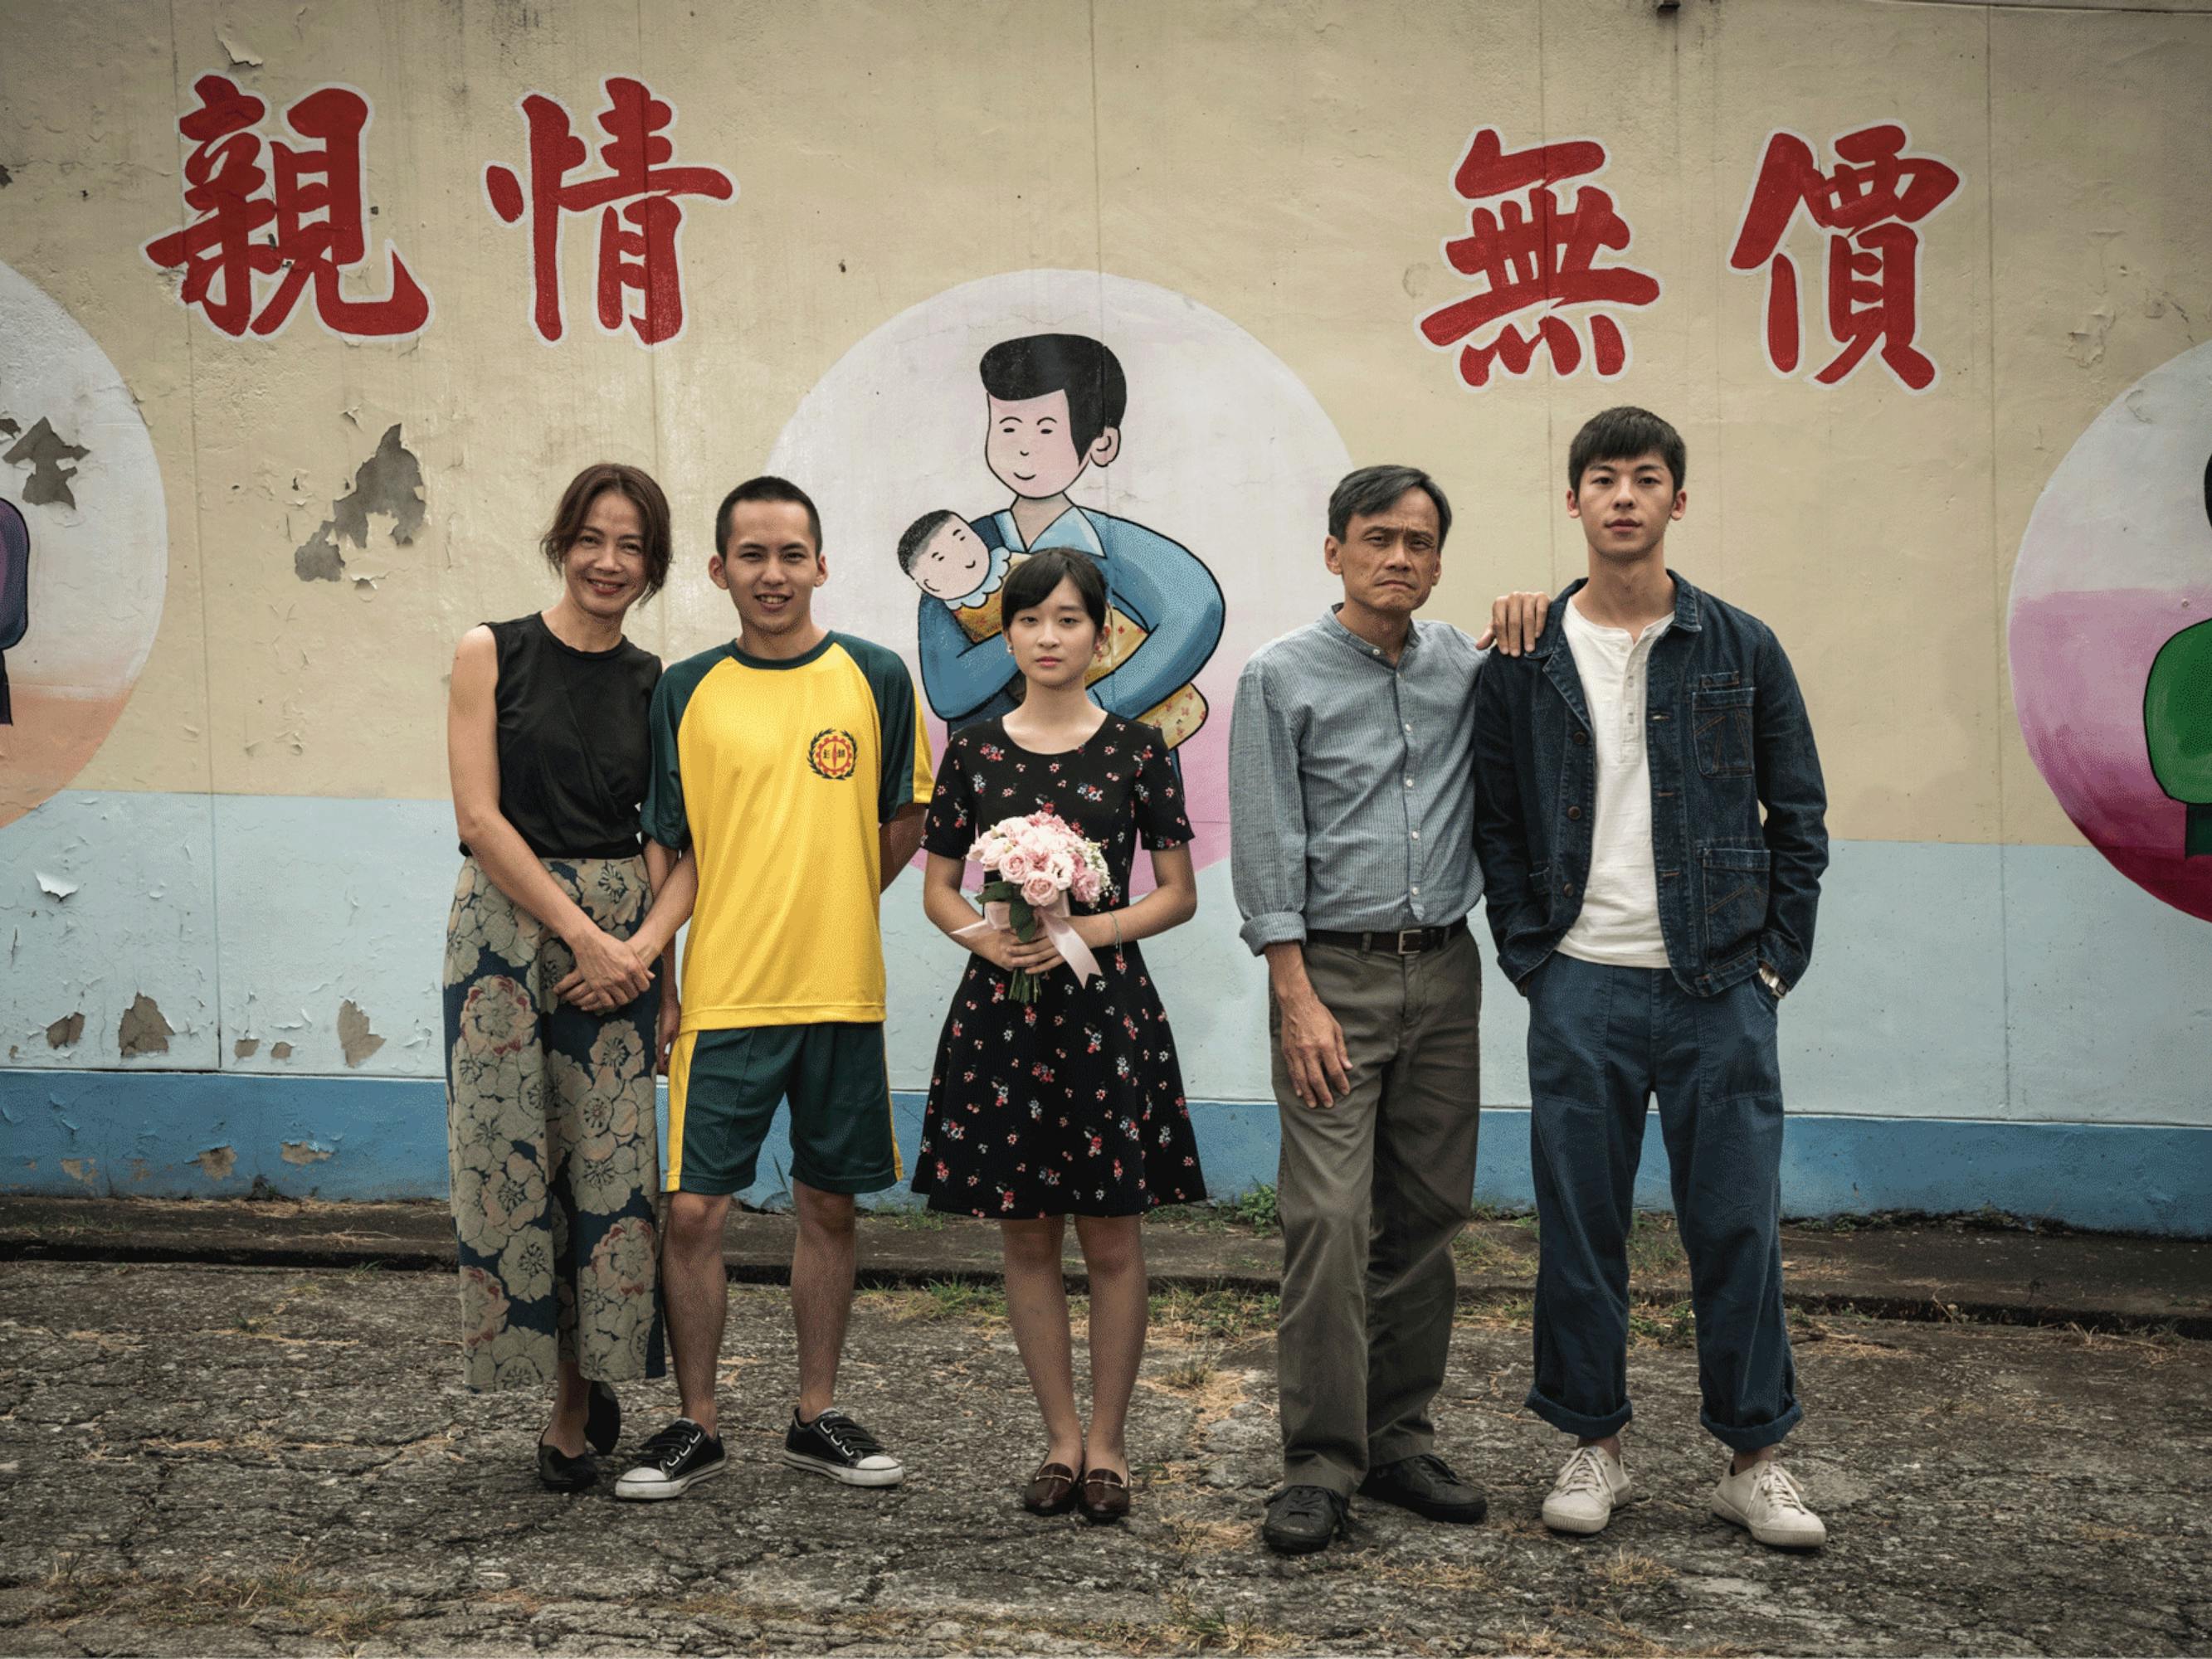 In this still from the film, the actors stand in front of a painted mural showing simple drawings of women holding infants. Wu Tai-ling, in the center, holds a bouquet of pink flowers. Samantha Ko and Wu Chien-ho stand in a pair on the left. Chen Yi-wen places a hand on Hsu Kuang-han’s shoulder. 